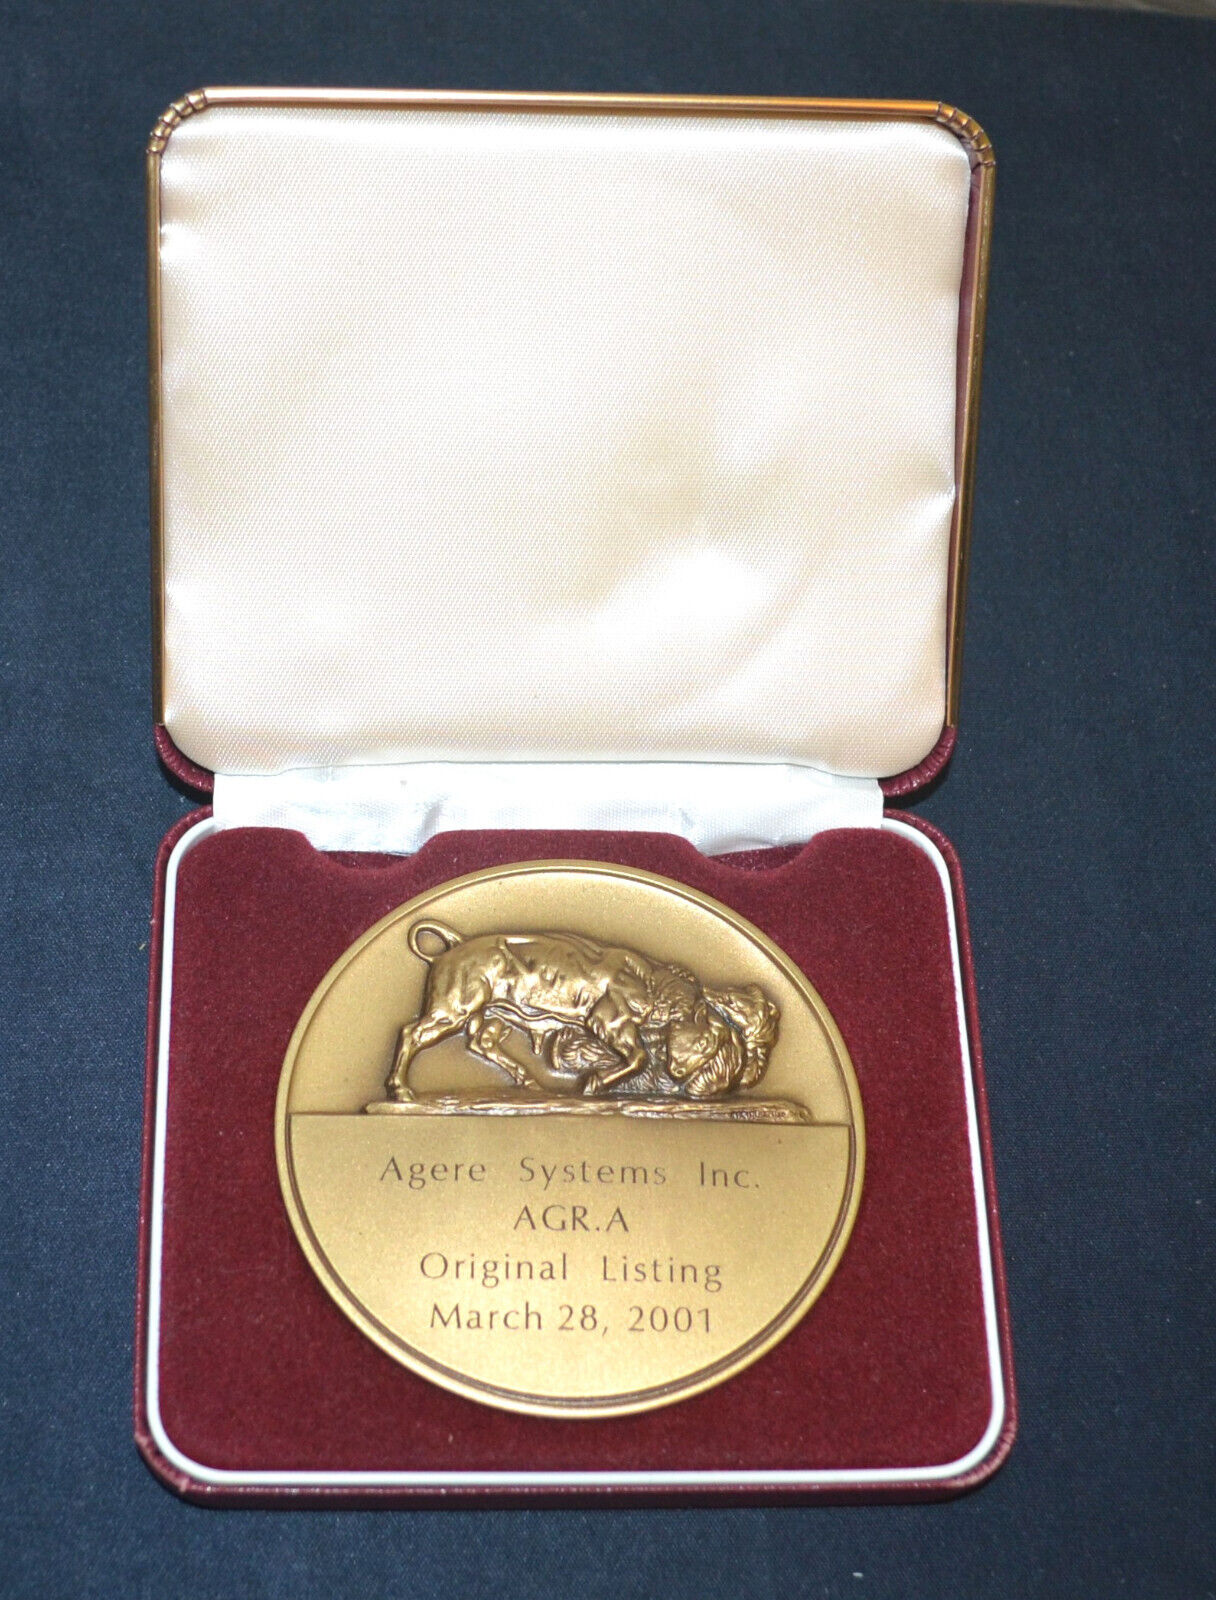 Agere Systems - NYSE 2001 Original Listing Medallion